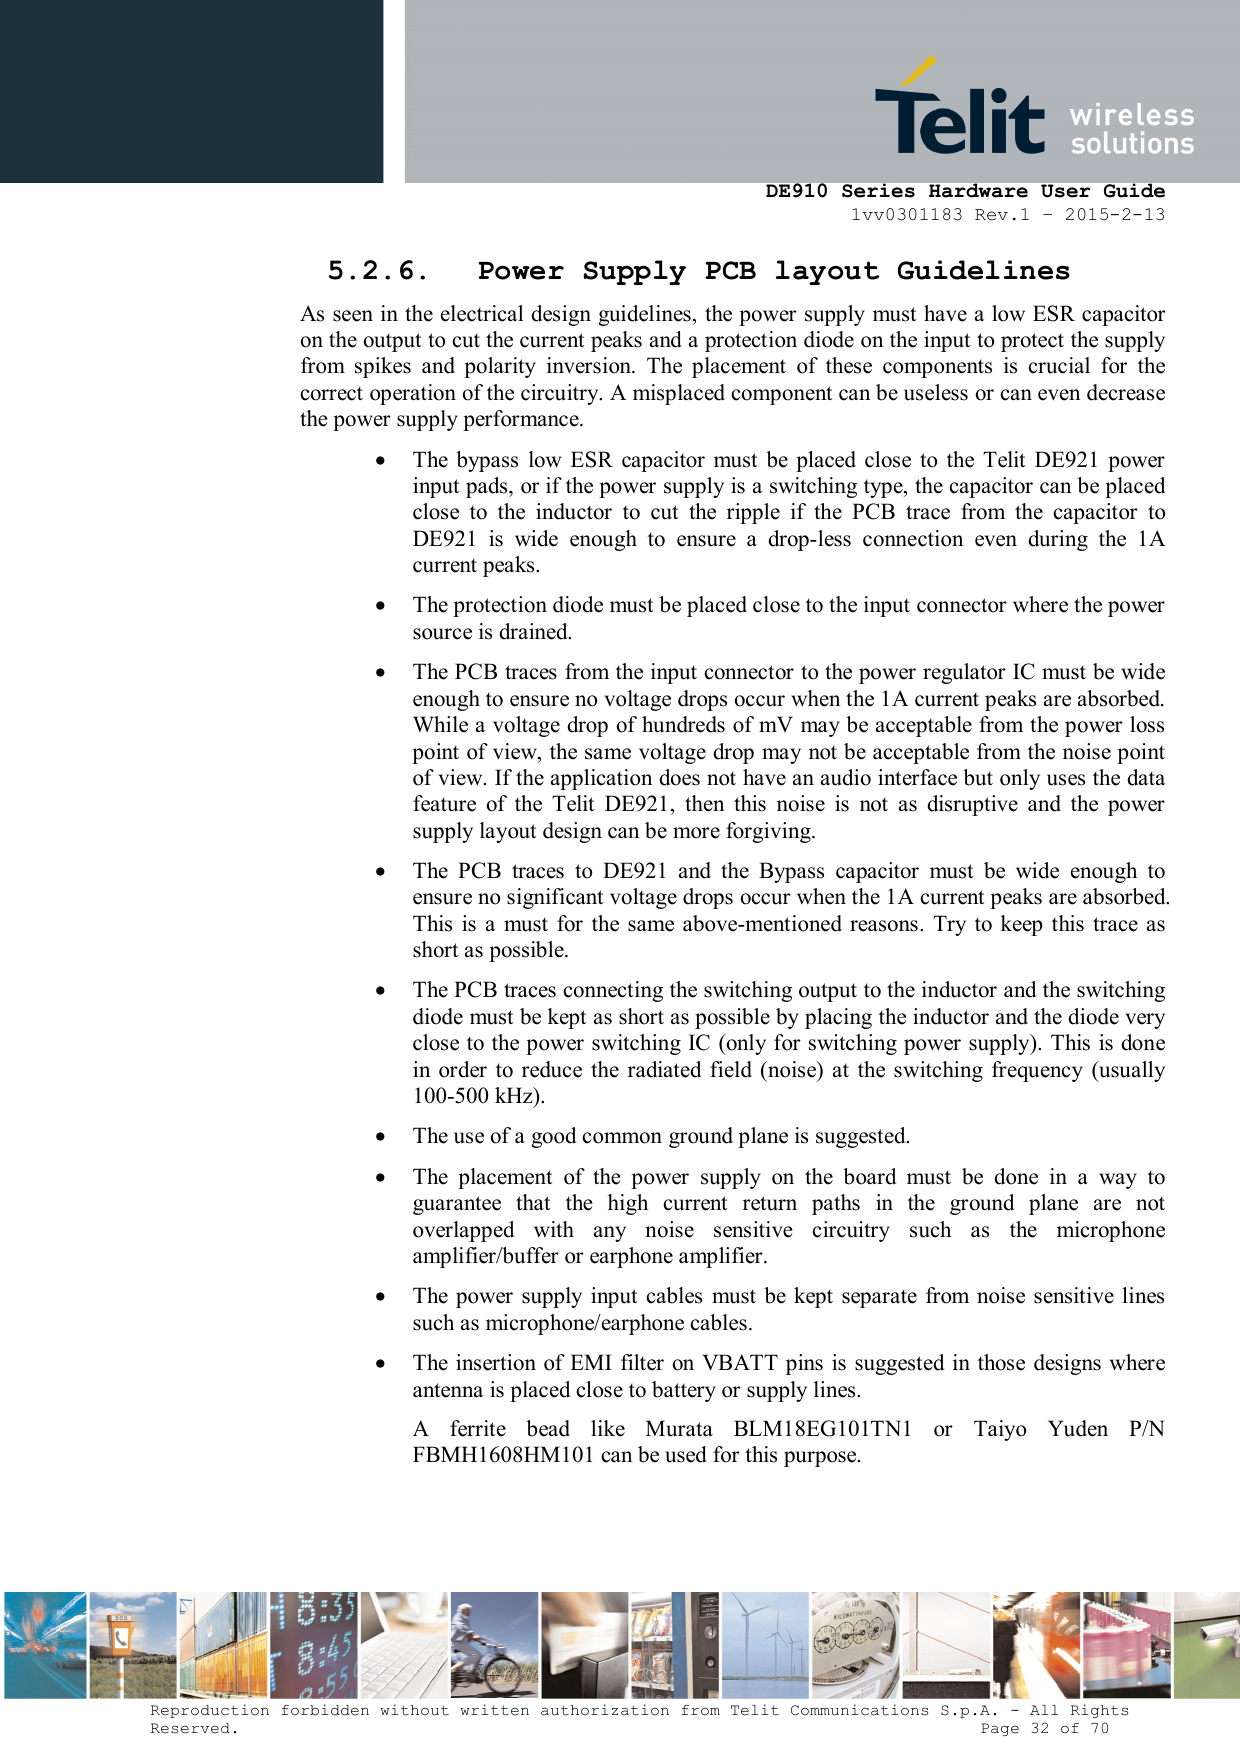      DE910 Series Hardware User Guide 1vv0301183 Rev.1 – 2015-2-13 Reproduction forbidden without written authorization from Telit Communications S.p.A. - All Rights Reserved.                                                                          Page 32 of 70 5.2.6. Power Supply PCB layout Guidelines As seen in the electrical design guidelines, the power supply must have a low ESR capacitor on the output to cut the current peaks and a protection diode on the input to protect the supply from  spikes  and  polarity  inversion.  The  placement  of  these  components  is  crucial  for  the correct operation of the circuitry. A misplaced component can be useless or can even decrease the power supply performance.  The  bypass  low  ESR  capacitor  must  be  placed  close  to  the  Telit  DE921  power input pads, or if the power supply is a switching type, the capacitor can be placed close  to  the  inductor  to  cut  the  ripple  if  the  PCB  trace  from  the  capacitor  to DE921  is  wide  enough  to  ensure  a  drop-less  connection  even  during  the  1A current peaks.  The protection diode must be placed close to the input connector where the power source is drained.  The PCB traces from the input connector to the power regulator IC must be wide enough to ensure no voltage drops occur when the 1A current peaks are absorbed. While a voltage drop of hundreds of mV may be acceptable from the power loss point of view, the same voltage drop may not be acceptable from the noise point of view. If the application does not have an audio interface but only uses the data feature  of  the  Telit  DE921,  then  this  noise  is  not  as  disruptive  and  the  power supply layout design can be more forgiving.  The  PCB  traces  to  DE921  and  the  Bypass  capacitor  must  be  wide  enough  to ensure no significant voltage drops occur when the 1A current peaks are absorbed. This is  a  must  for  the same  above-mentioned reasons. Try to keep this  trace as short as possible.  The PCB traces connecting the switching output to the inductor and the switching diode must be kept as short as possible by placing the inductor and the diode very close to the power switching IC (only for switching power supply). This is done in order  to reduce the  radiated field (noise)  at  the  switching frequency  (usually 100-500 kHz).  The use of a good common ground plane is suggested.  The  placement  of  the  power  supply  on  the  board  must  be  done  in  a  way  to guarantee  that  the  high  current  return  paths  in  the  ground  plane  are  not overlapped  with  any  noise  sensitive  circuitry  such  as  the  microphone amplifier/buffer or earphone amplifier.  The  power supply input  cables  must  be  kept  separate  from noise sensitive lines such as microphone/earphone cables.   The insertion of EMI filter on VBATT pins is suggested in  those  designs where antenna is placed close to battery or supply lines.                                                A  ferrite  bead  like  Murata  BLM18EG101TN1  or  Taiyo  Yuden  P/N FBMH1608HM101 can be used for this purpose.    